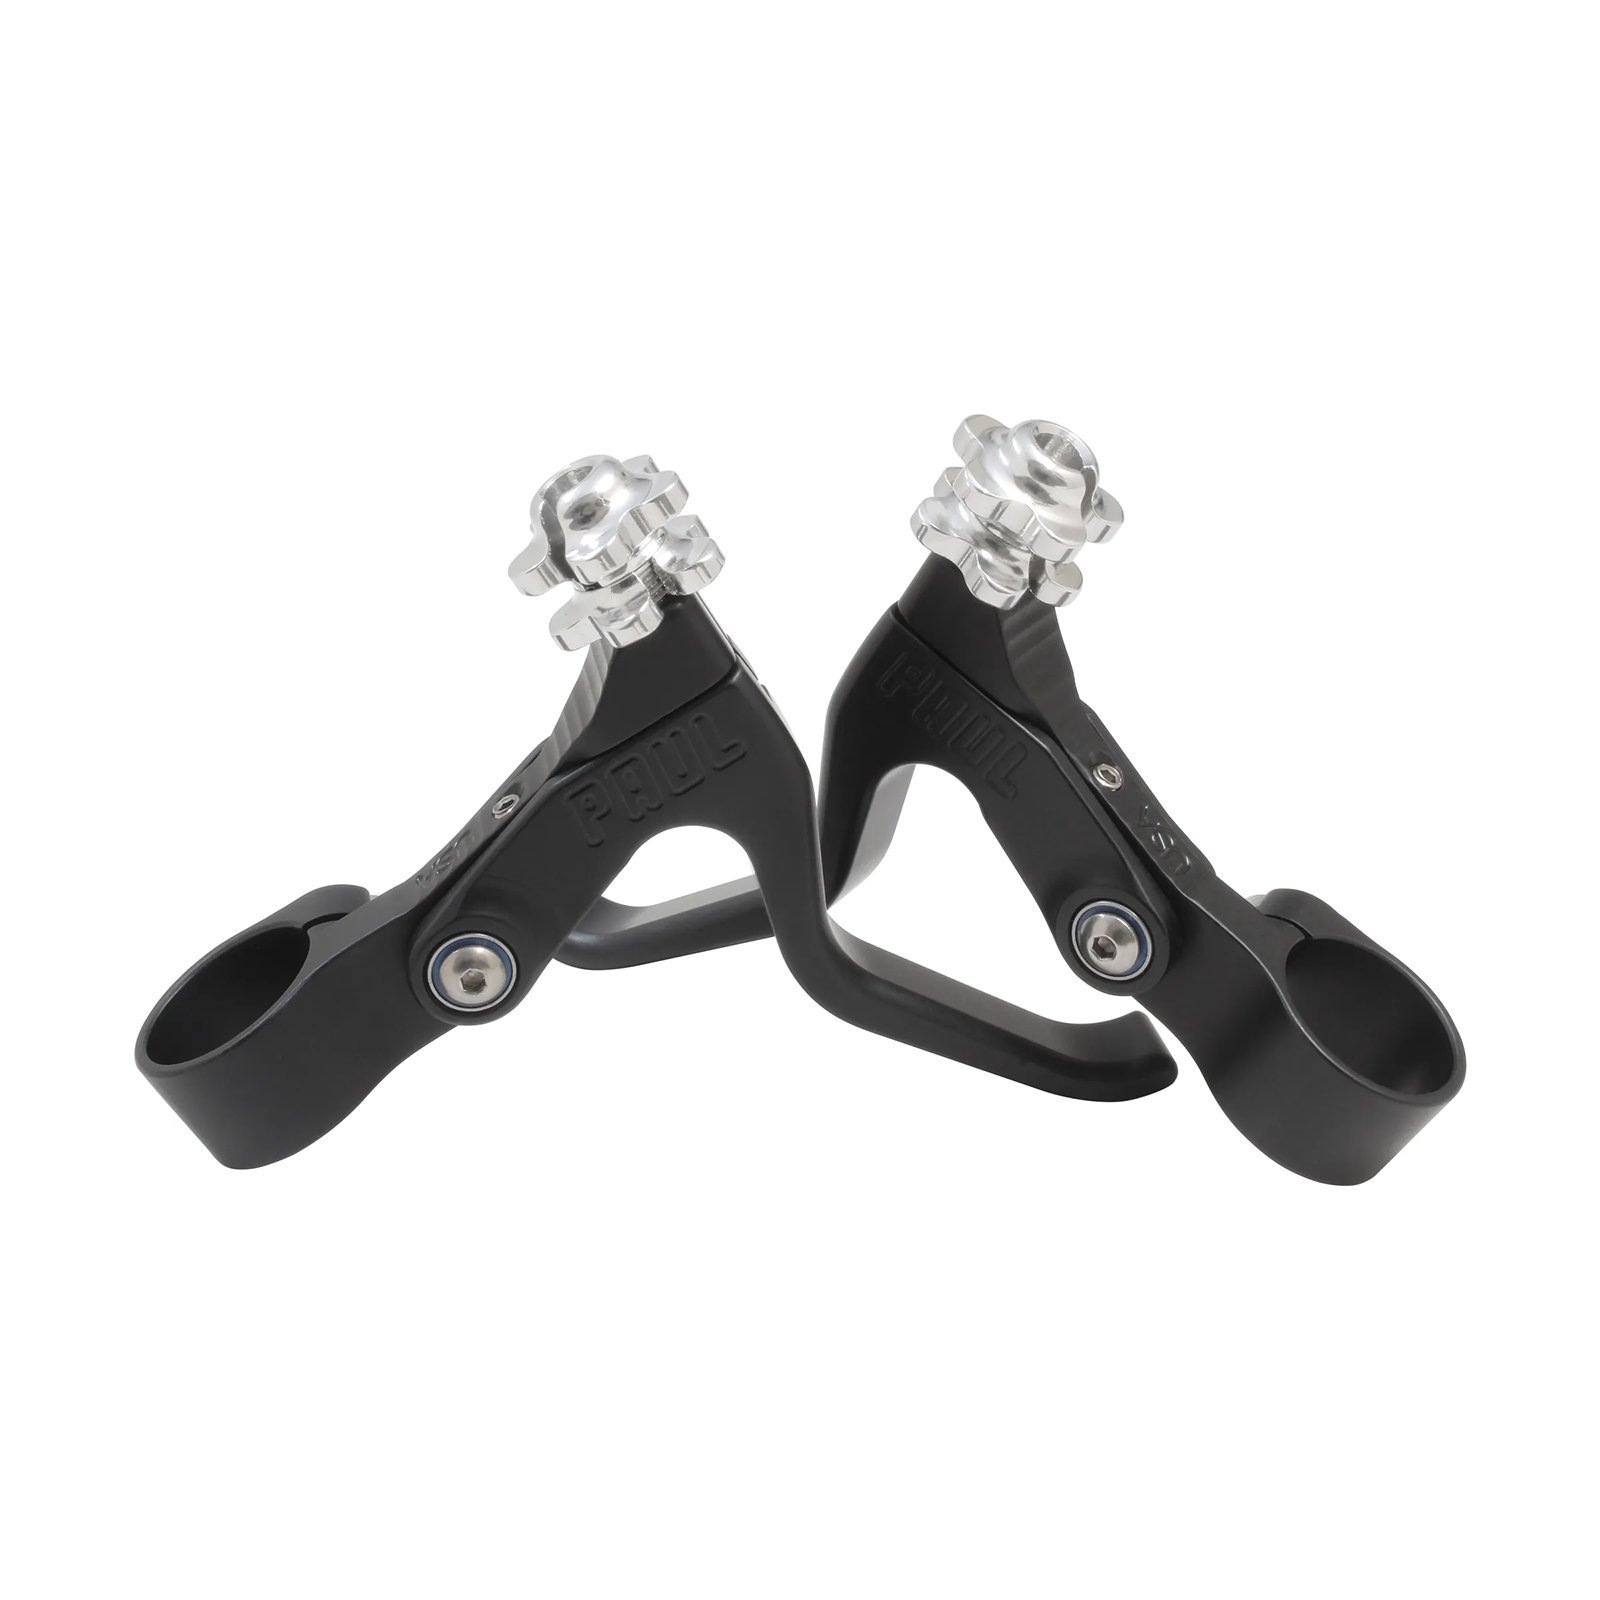 Paul - Love Lever Compact - Pair (22.2mm) - ParkSIDER